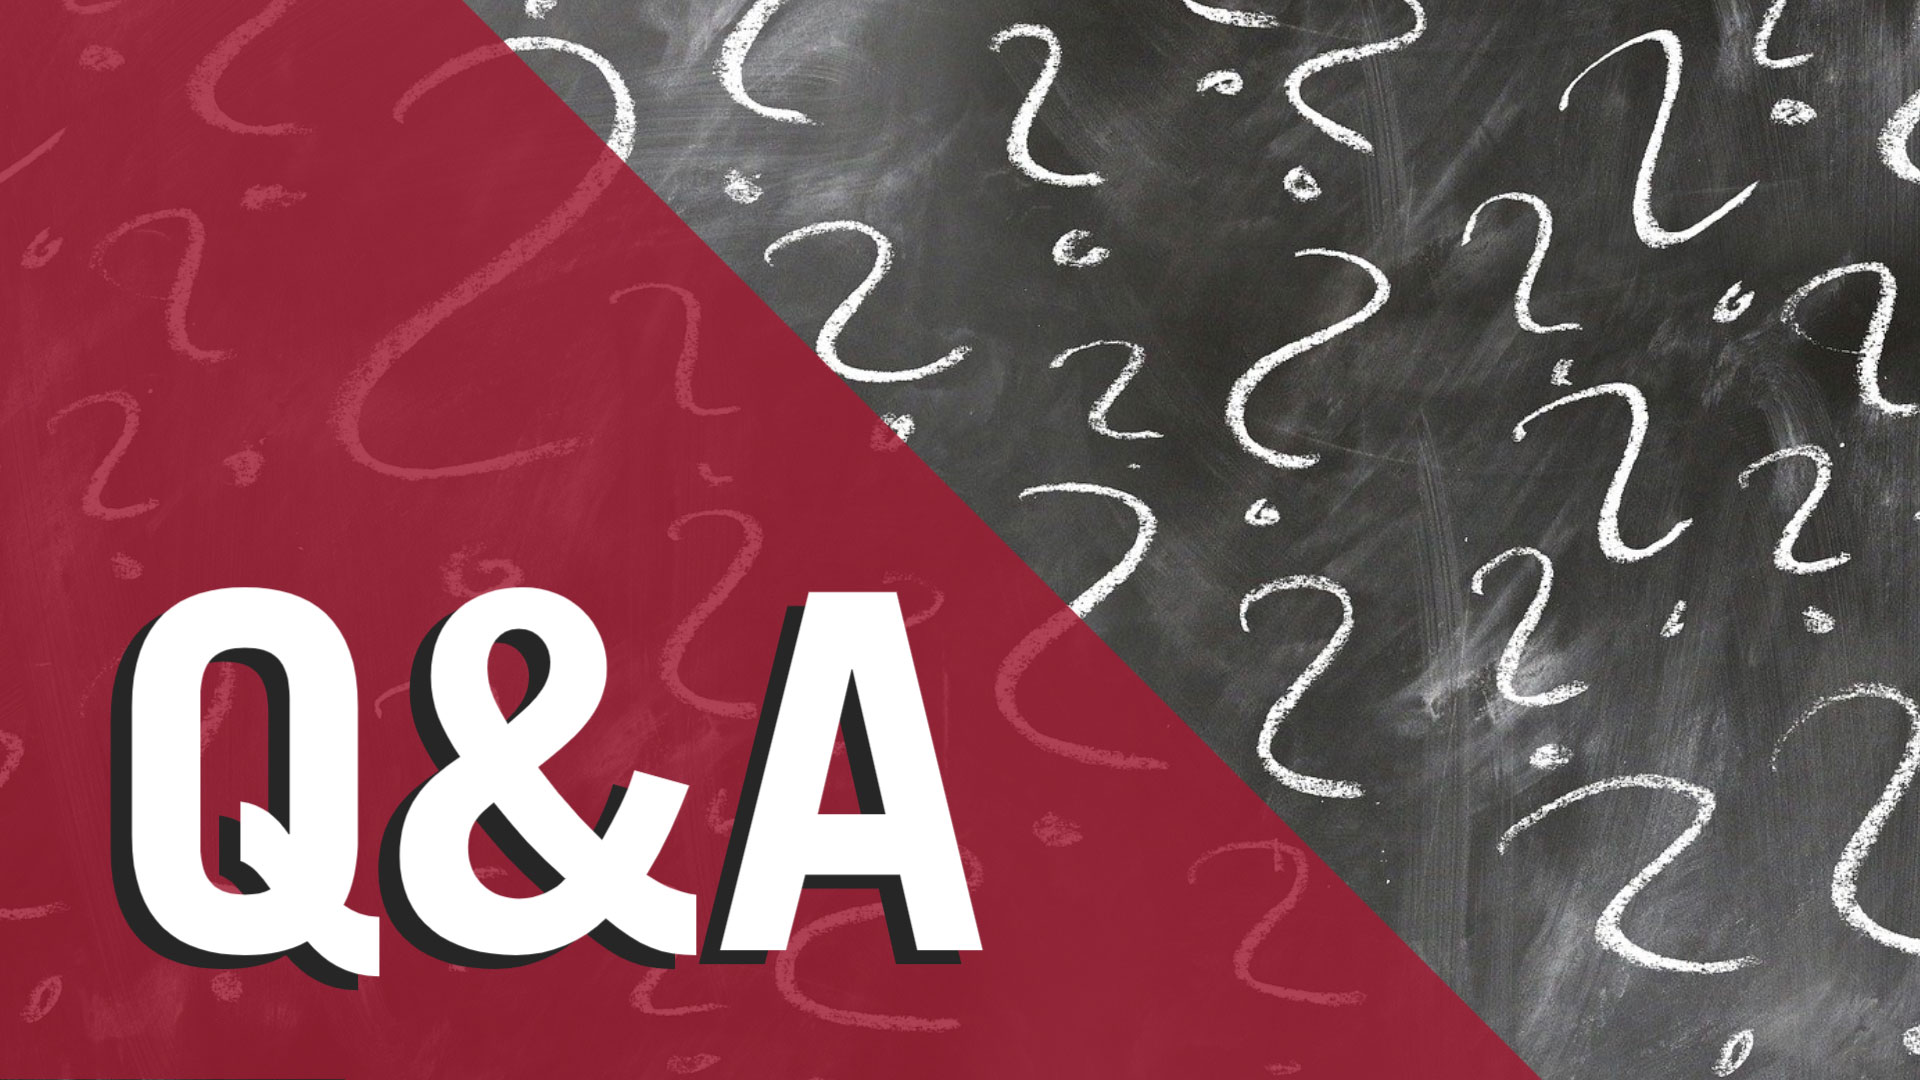 The letters Q&A over a chalkboard with question marks drawn in chalk